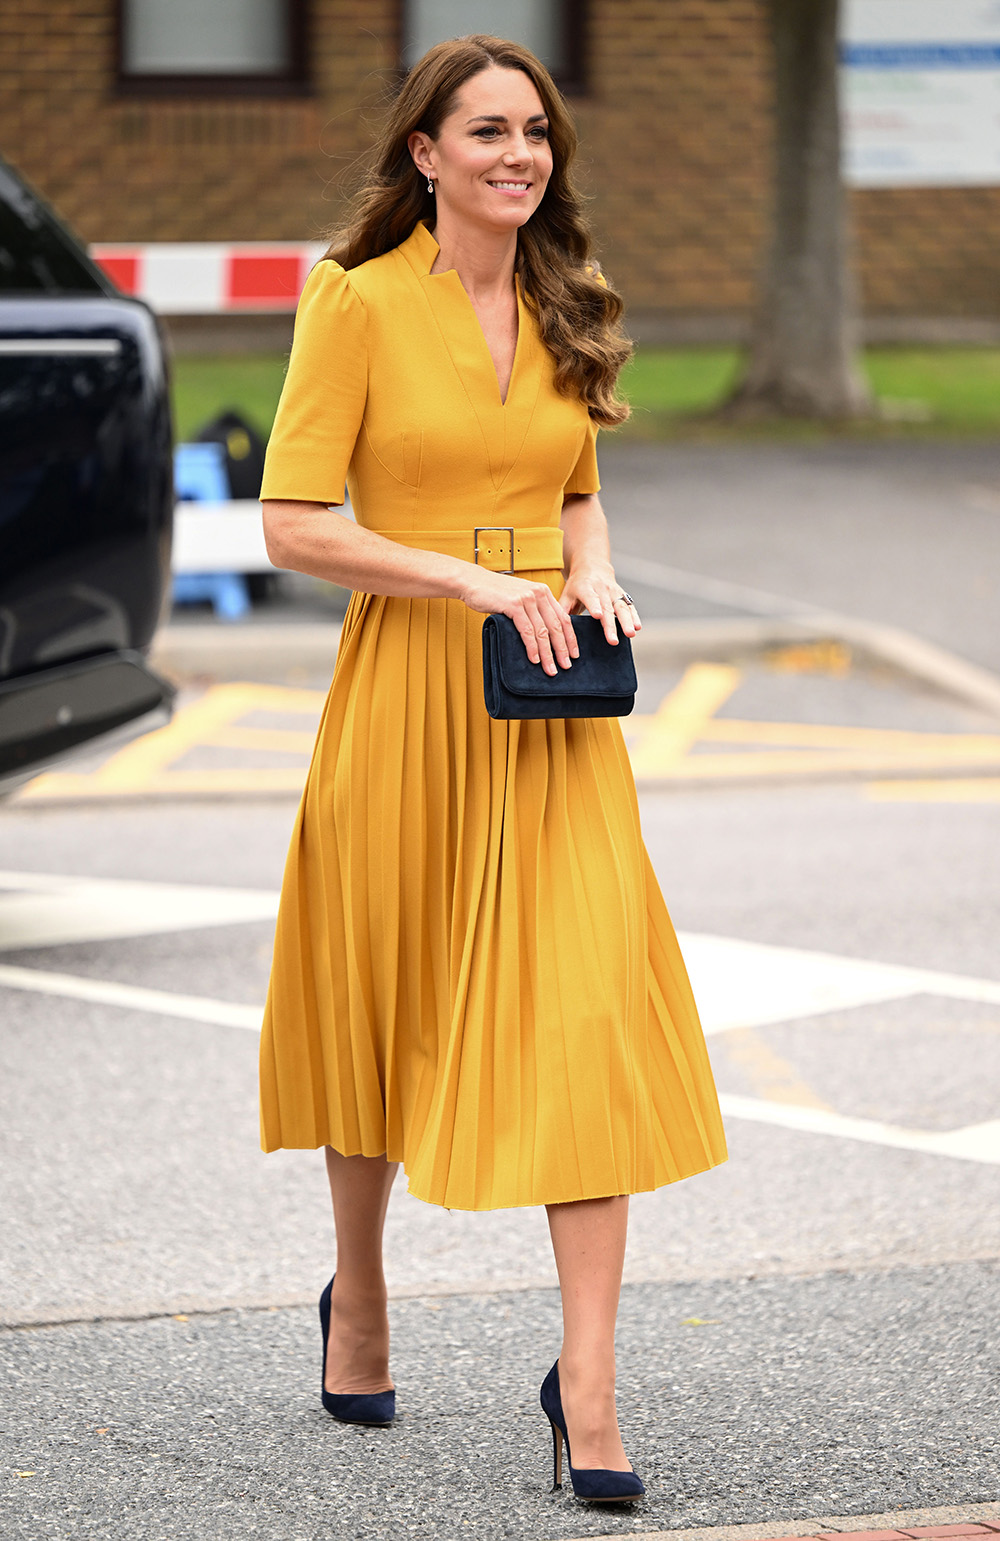 Royal Fans React to Kate Middleton's Recent Hairstyle